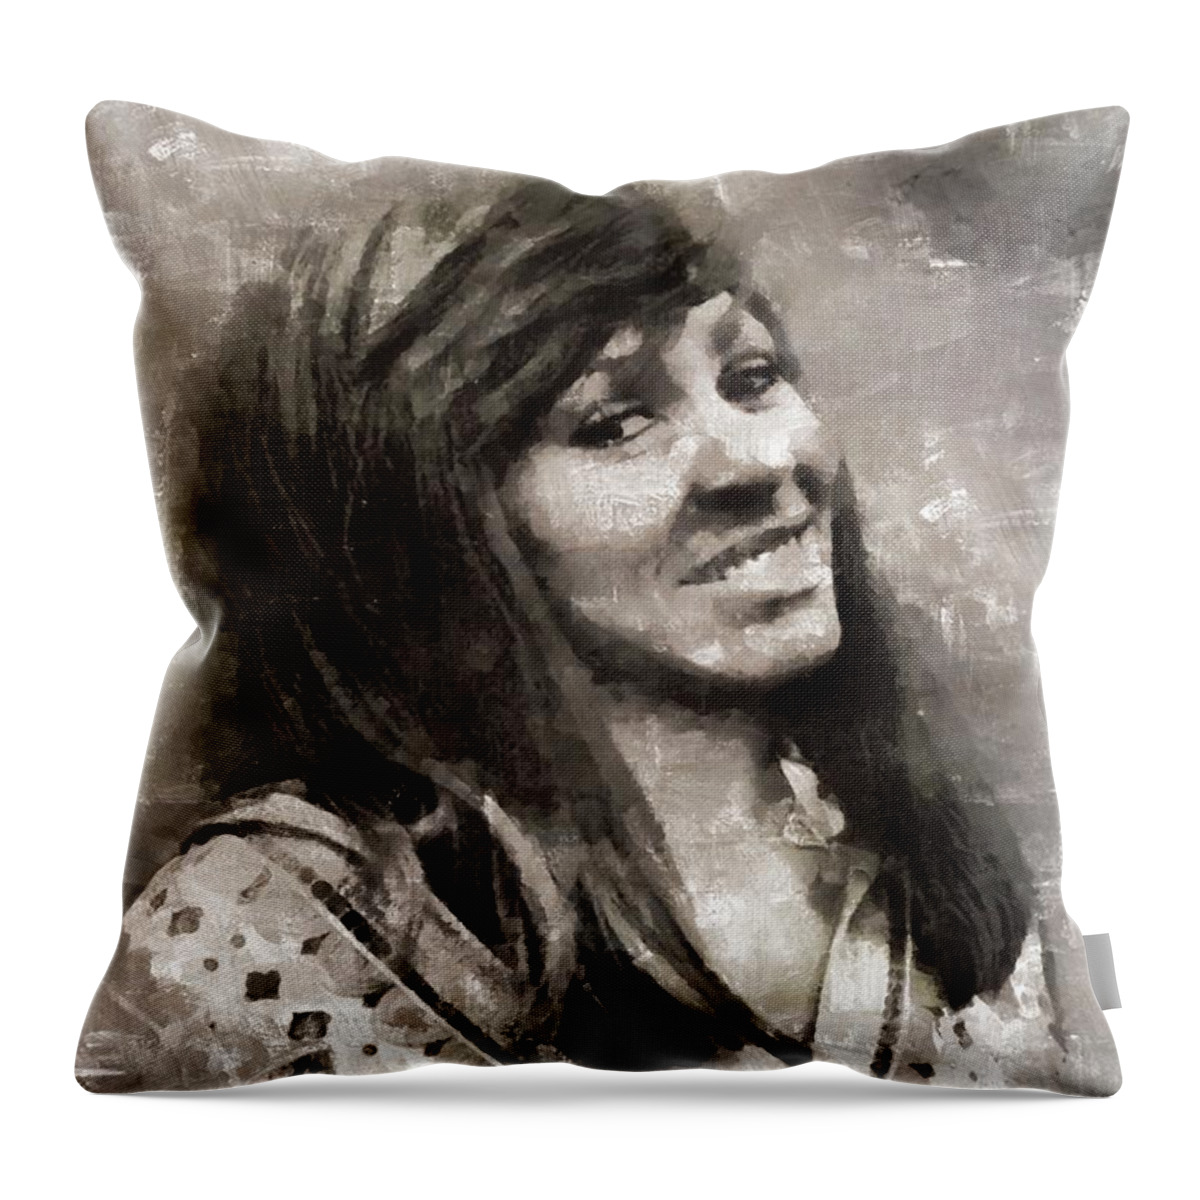  Throw Pillow featuring the painting Tina Turner, Singer by Esoterica Art Agency